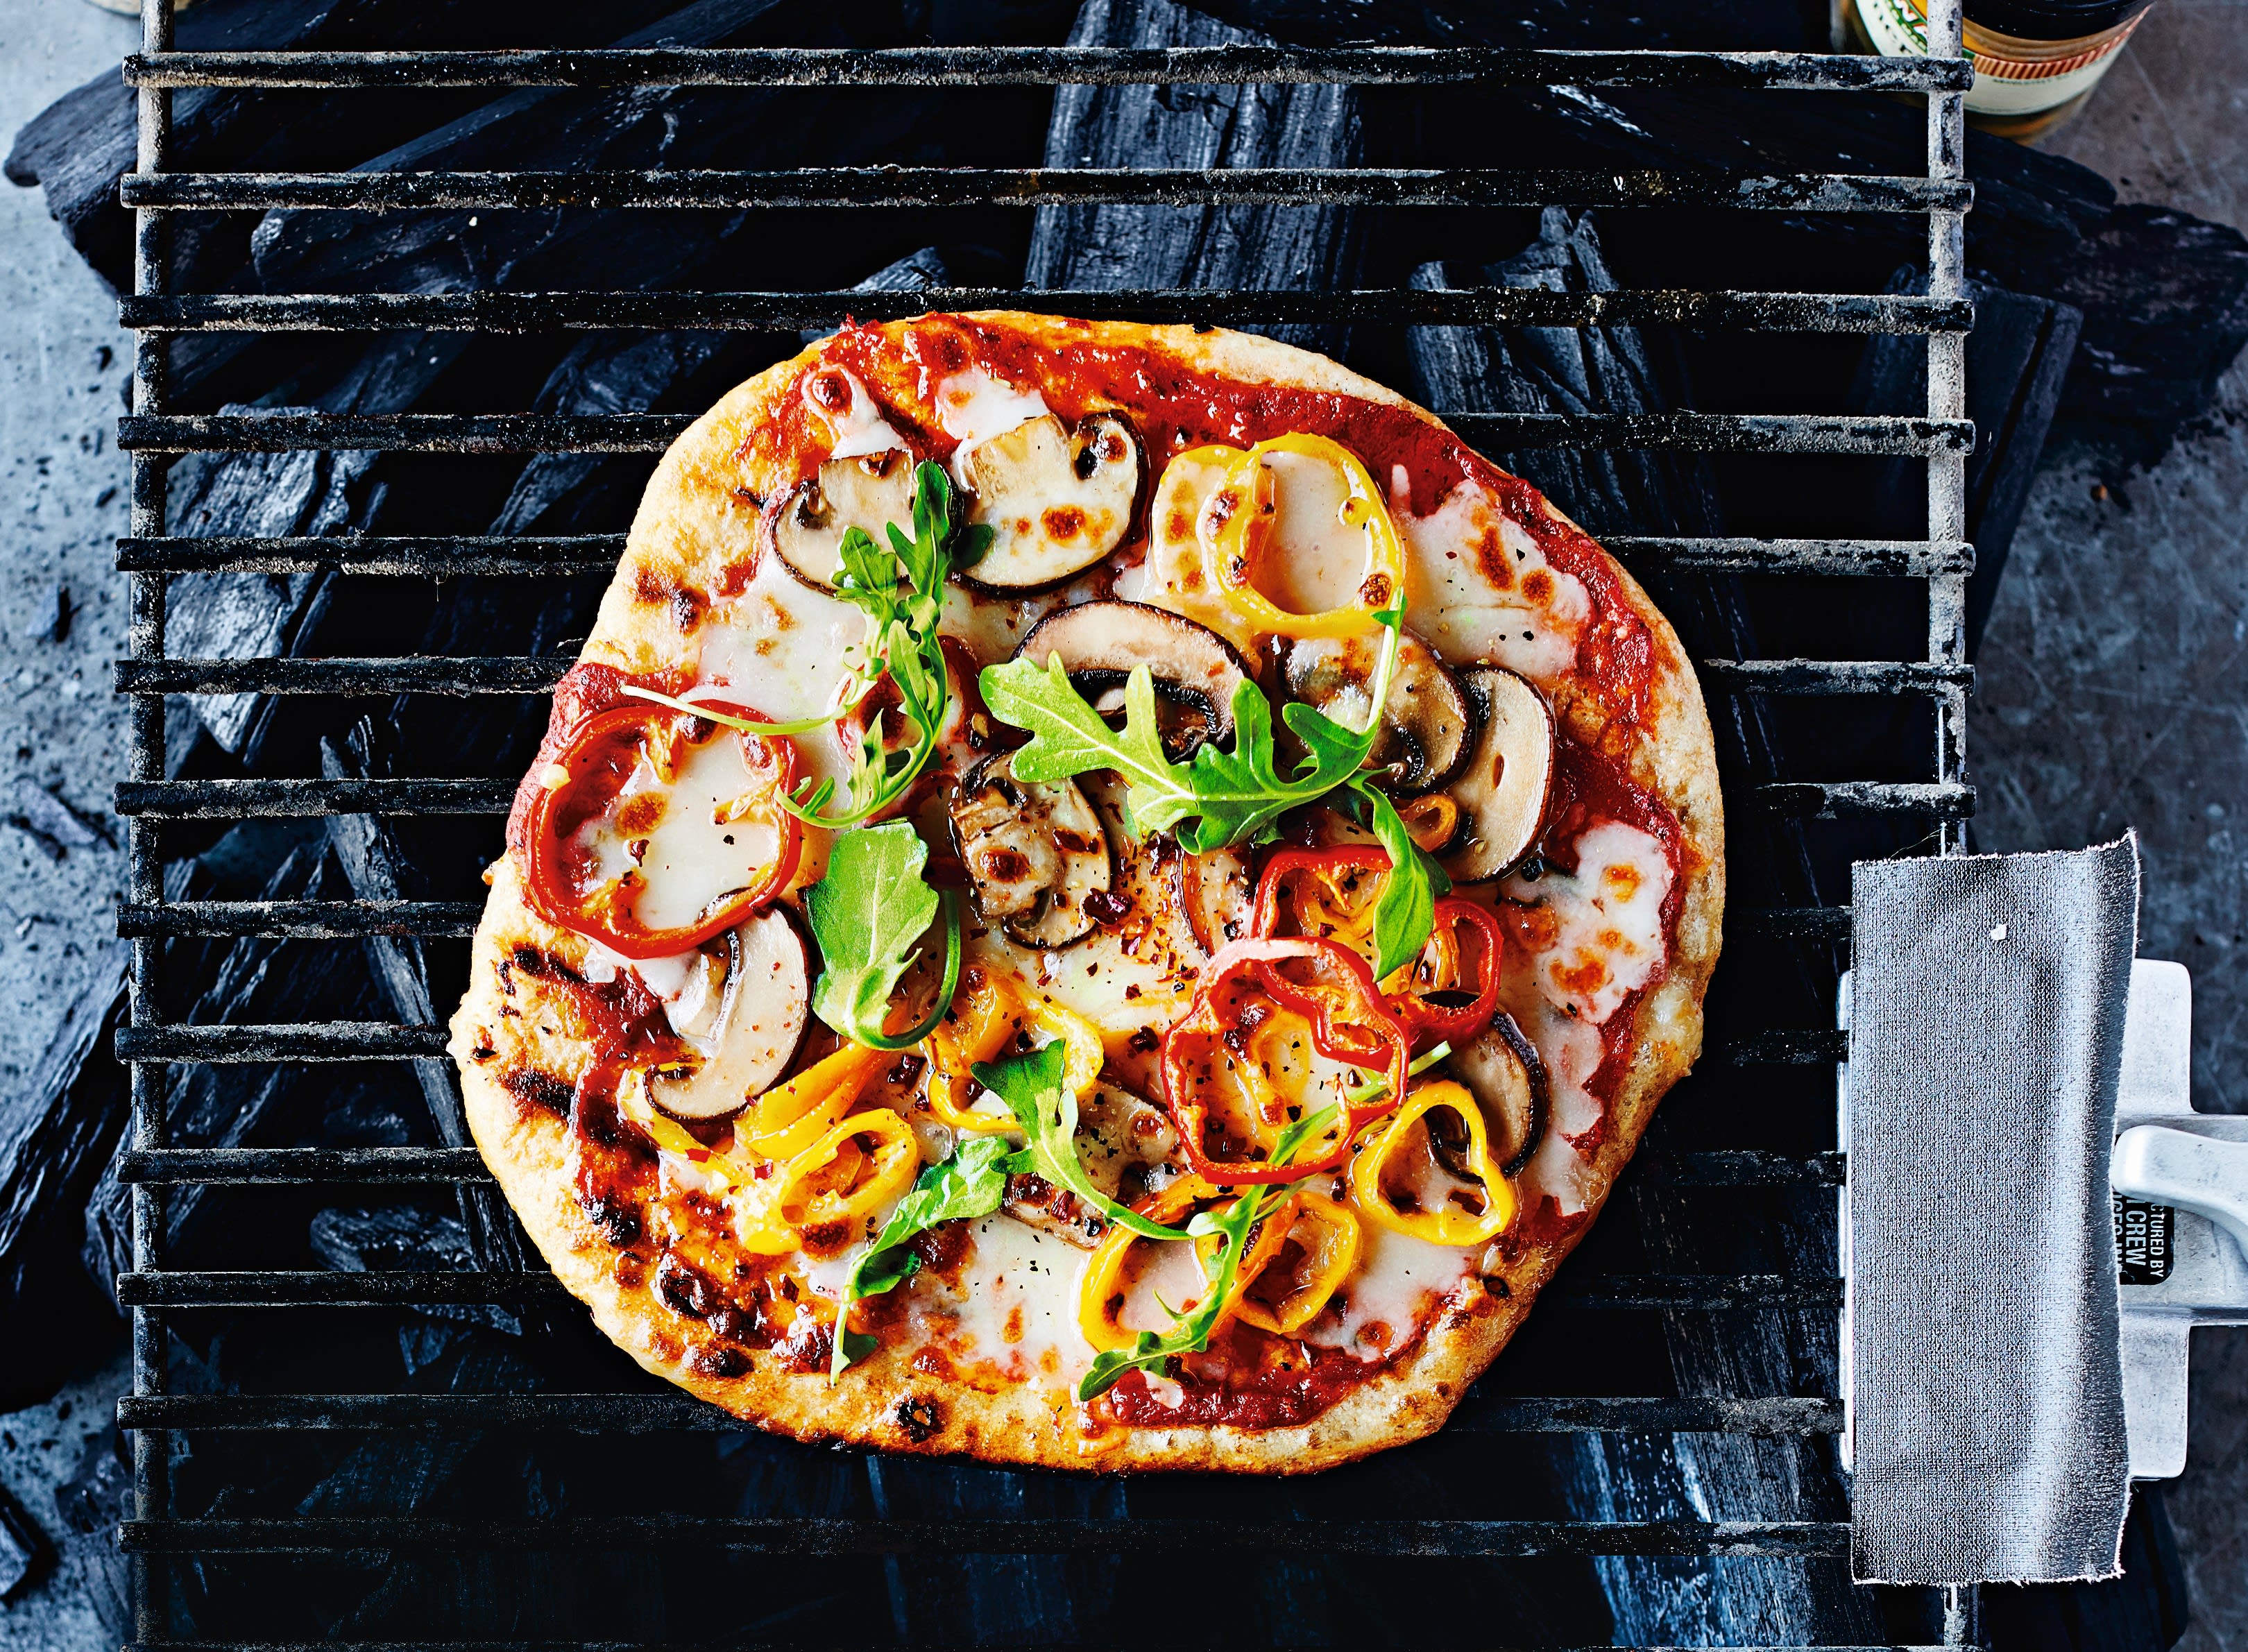 Photo of Barbecued pizza by WW